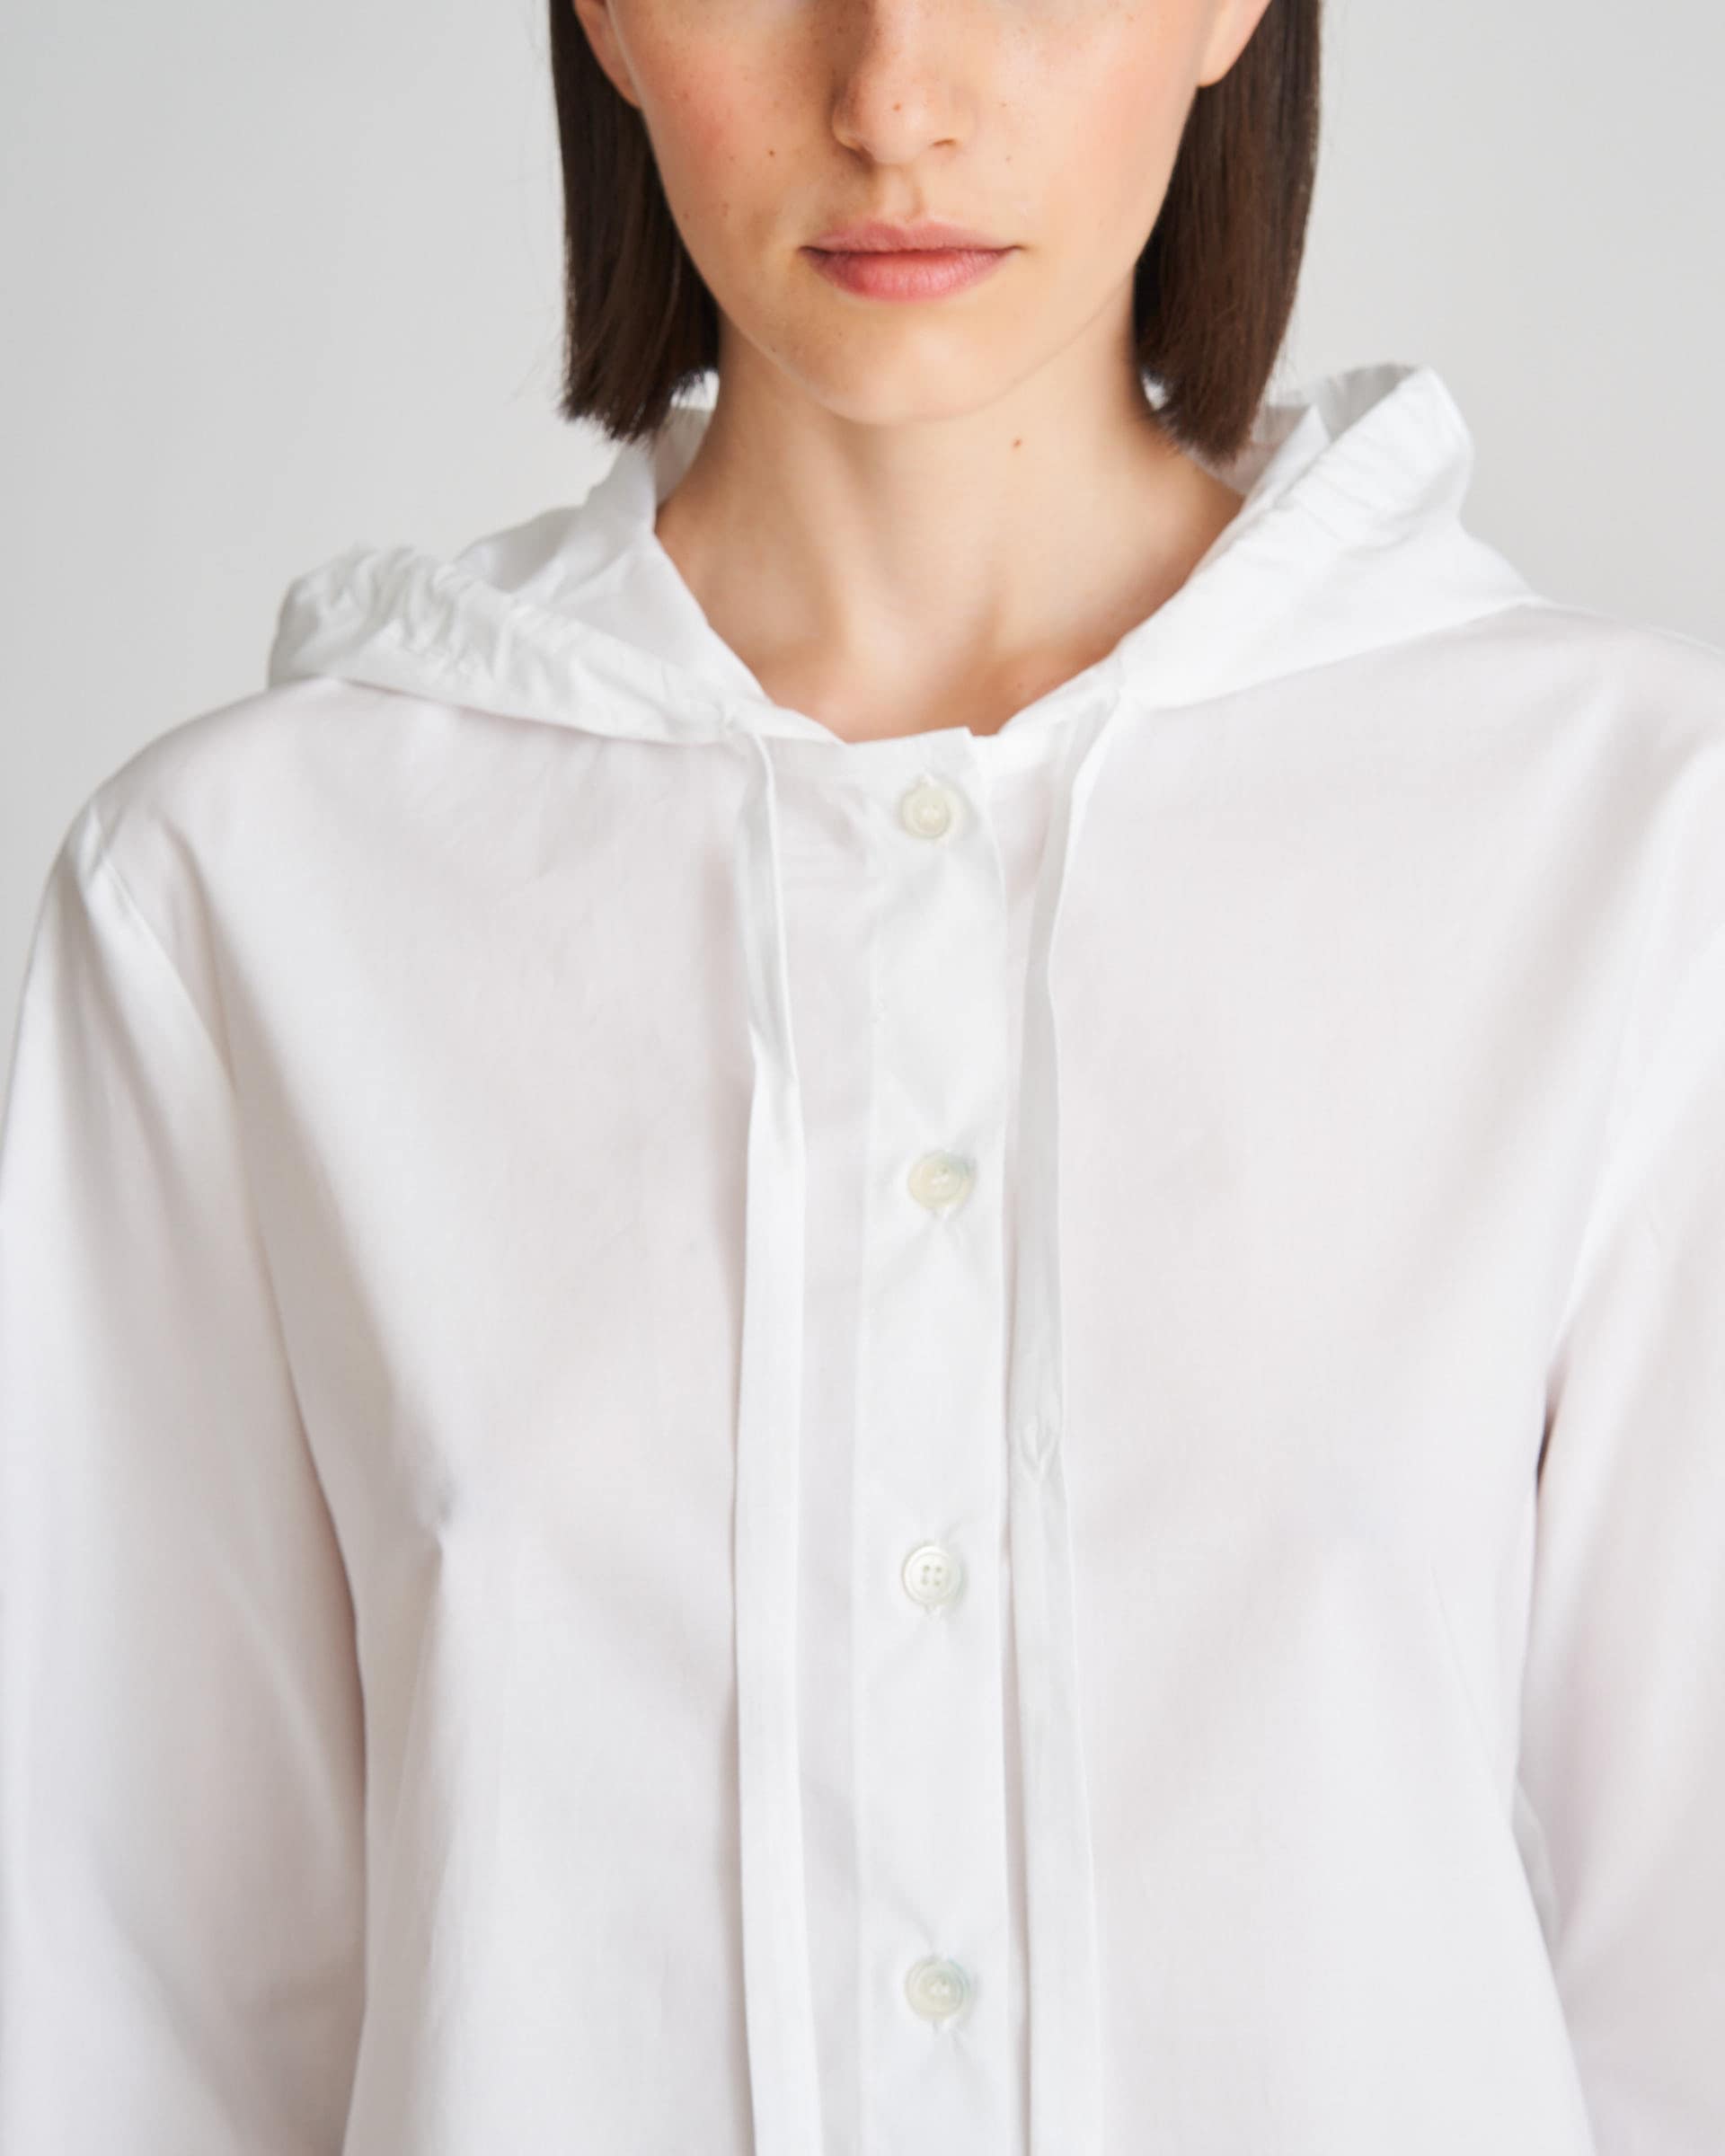 The Market Store | Shirt With Hood